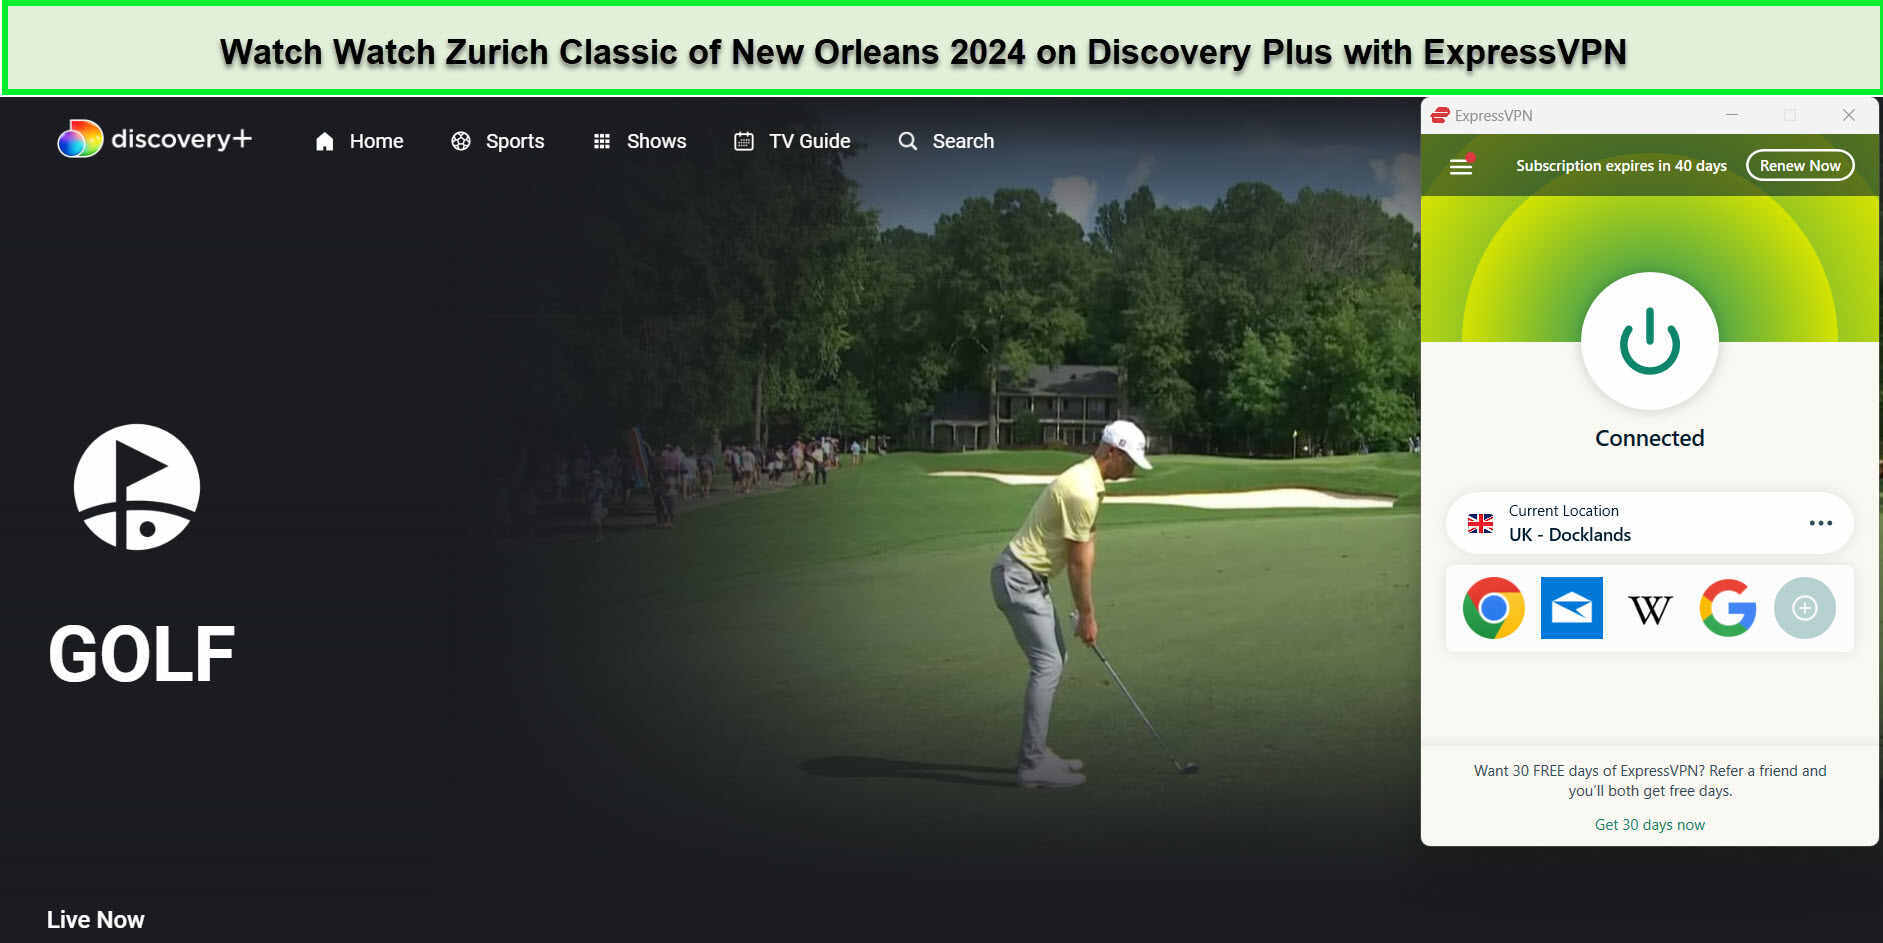 Watch-Zurich-Classic-of-New-Orleans-2024-in-UK-On-Discovery-Plus-with-ExpressVPN